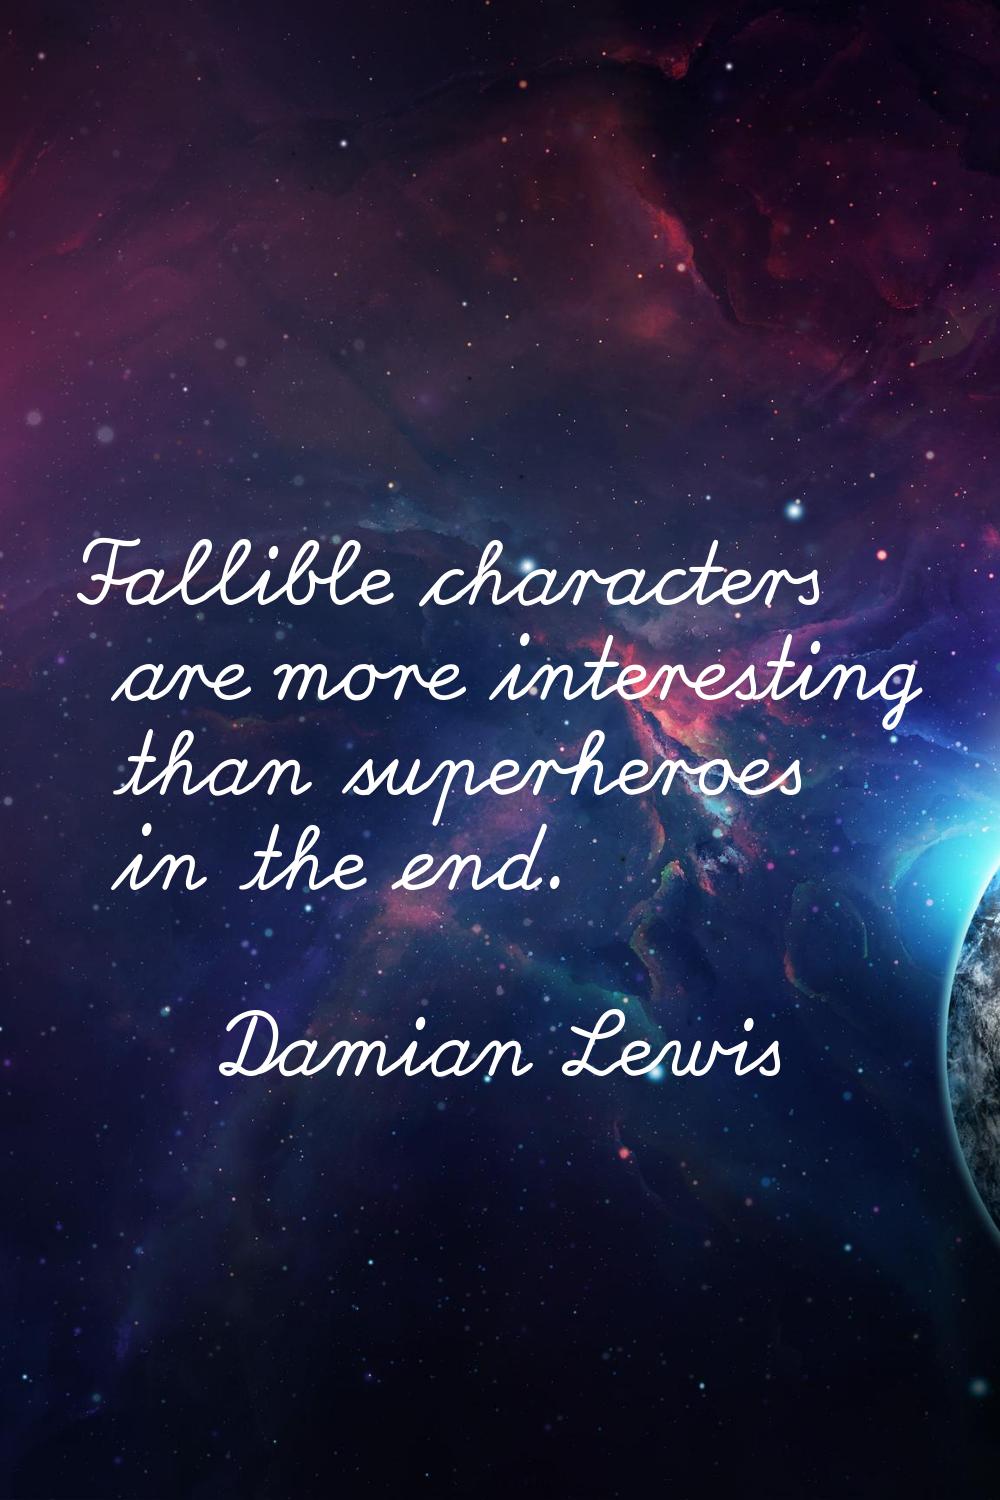 Fallible characters are more interesting than superheroes in the end.